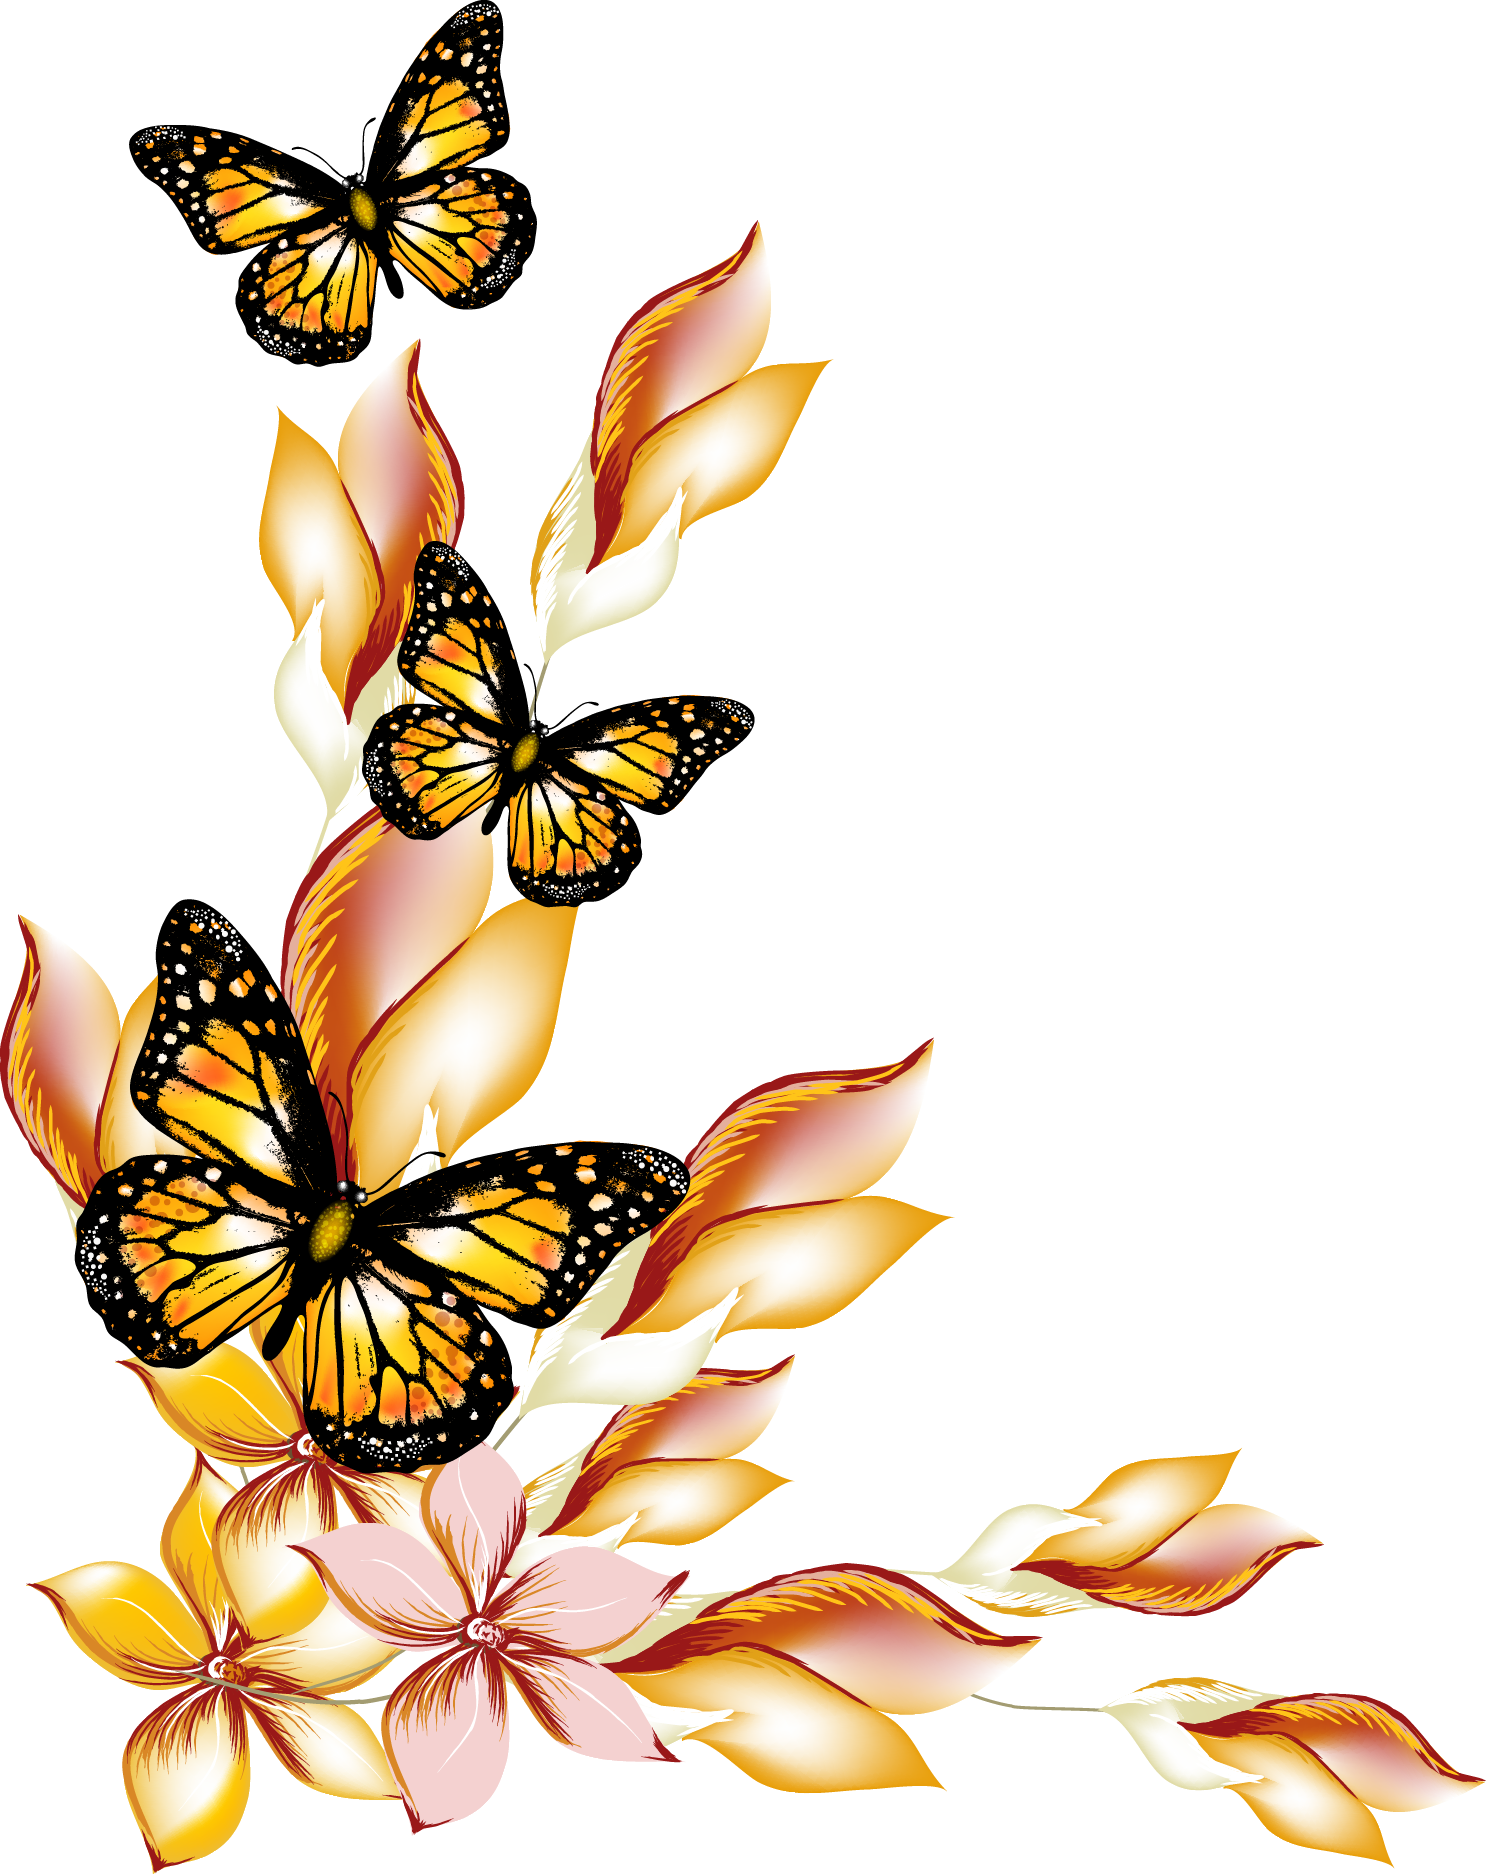 Flowers And Butterflies Borders Vector - Border Design Flowers And Butterfly (1486x1874)